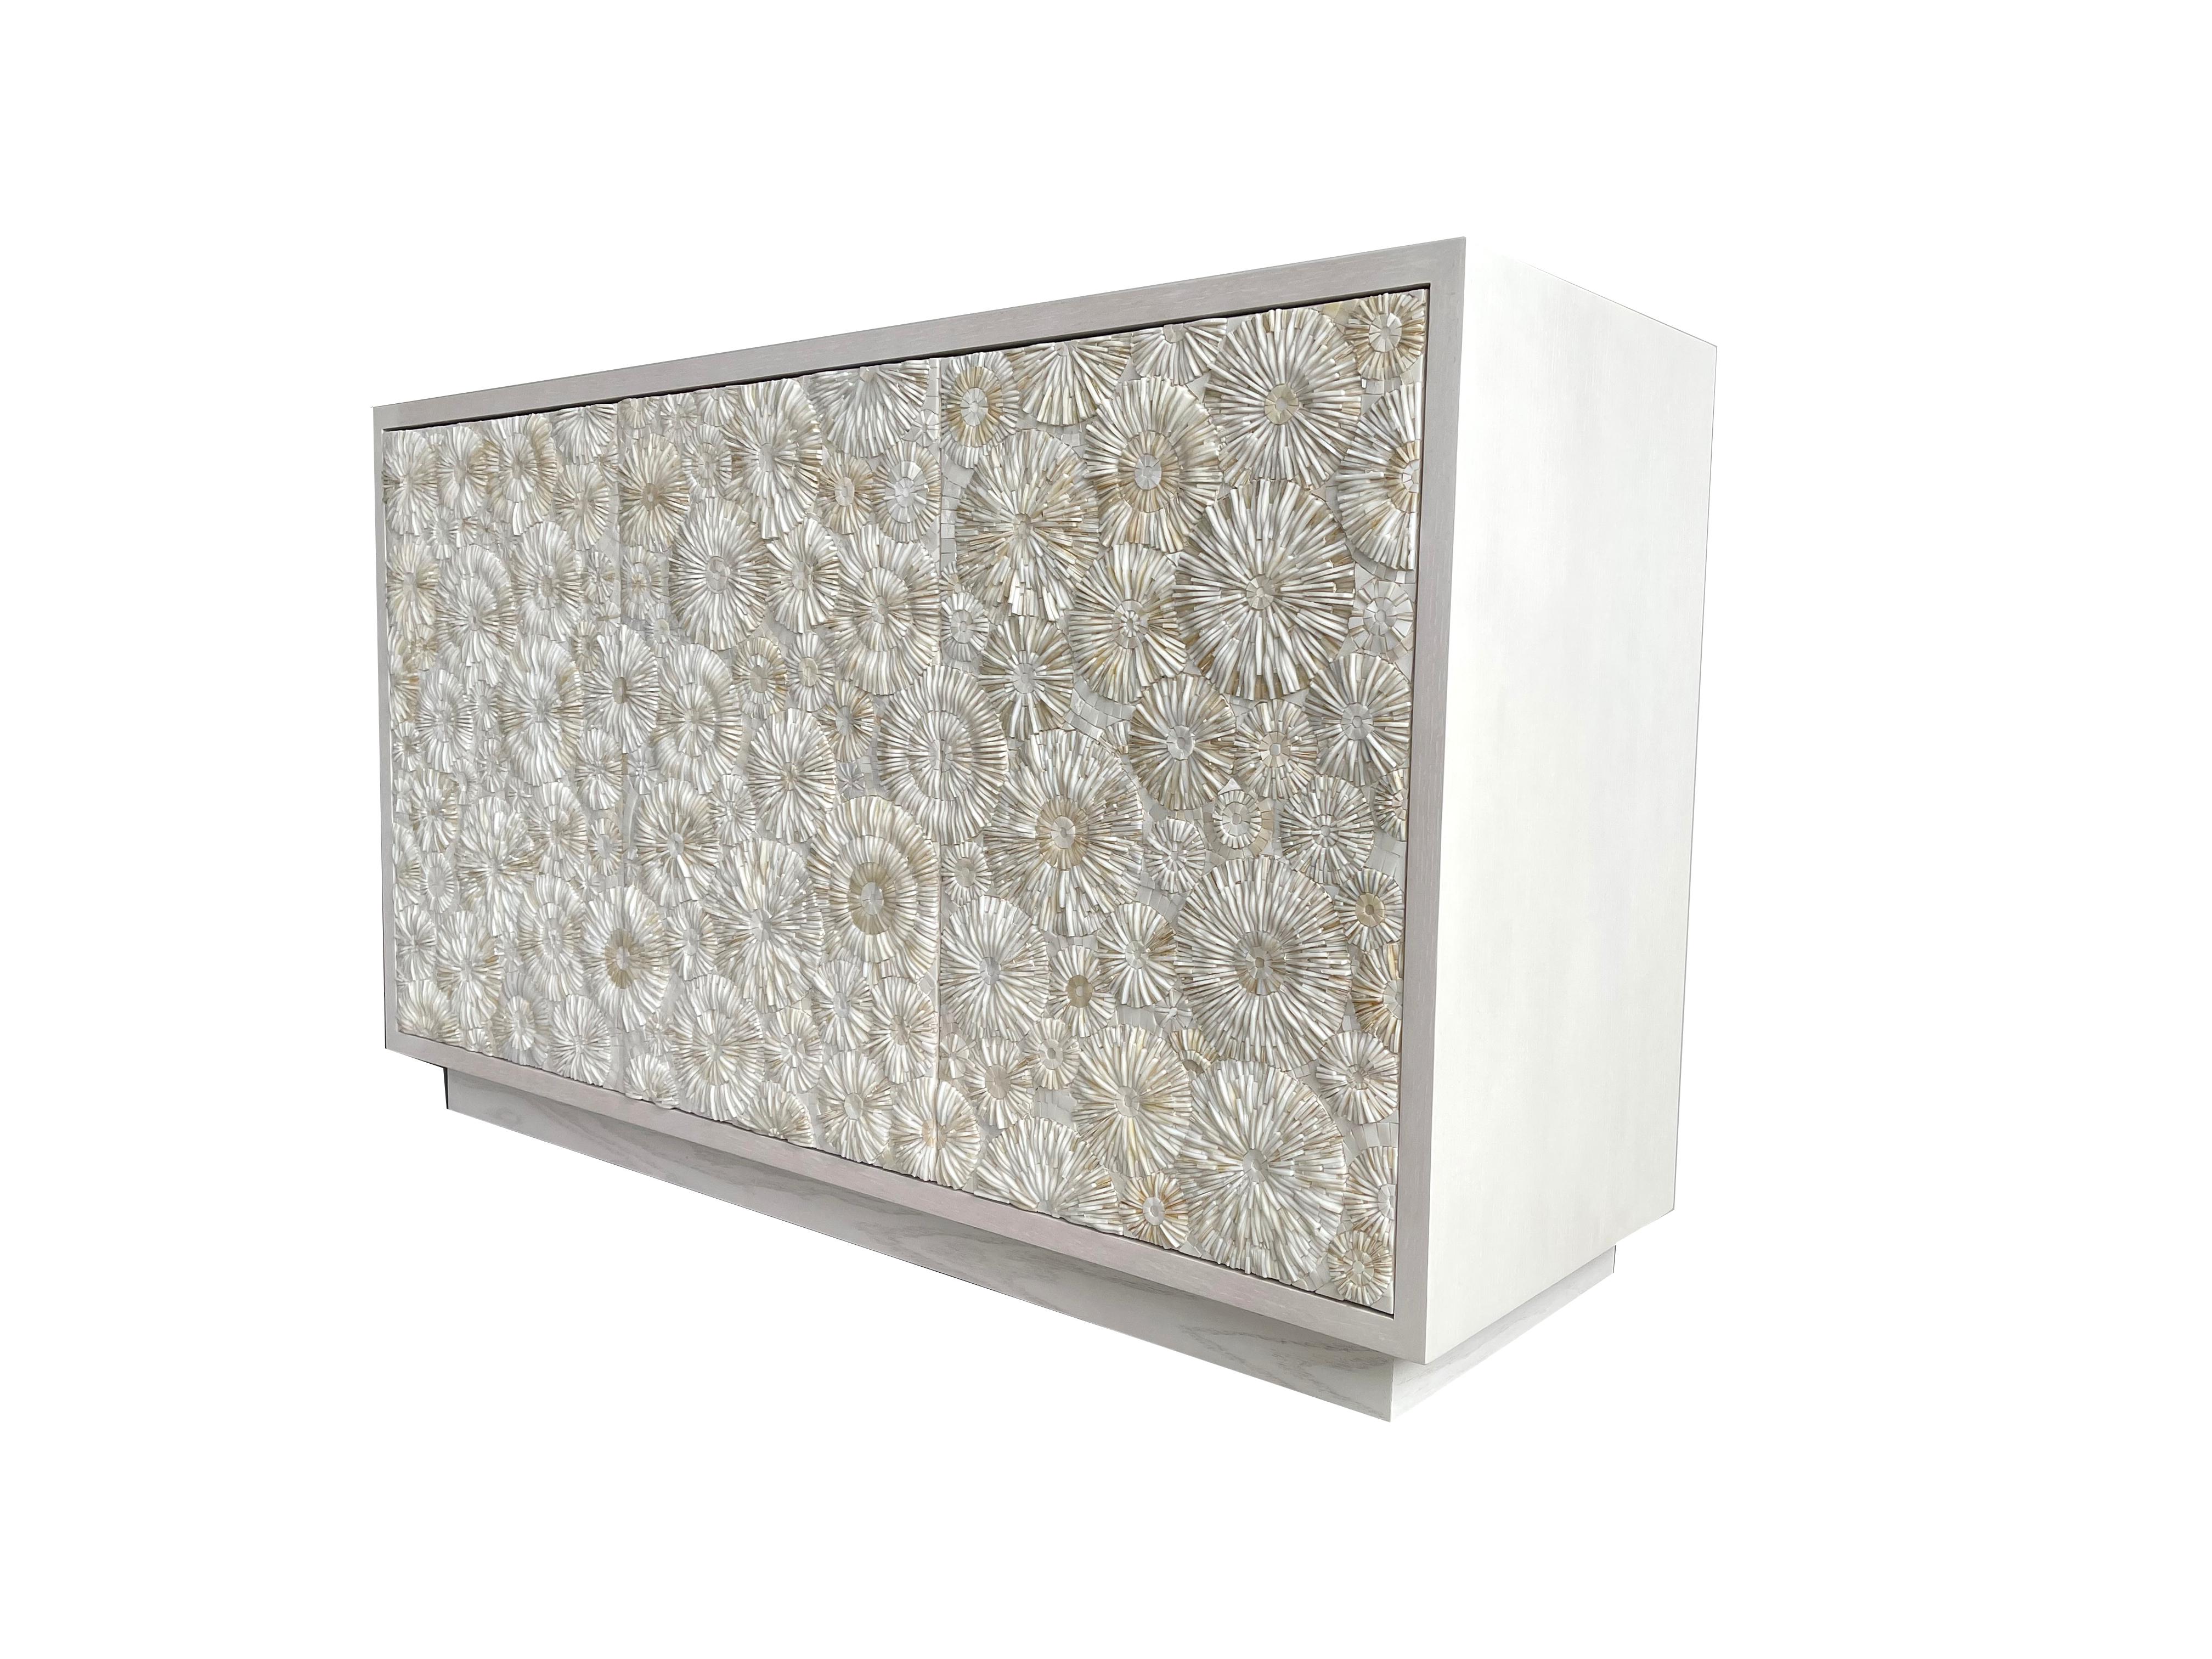 The Blossom Buffet is a two compartment cabinet with three touch latch doors and two compartments, one large and one small. The oak wood is finished in a washed ivory and the doors are each fully covered in our one of a kind blossom mosaic pattern